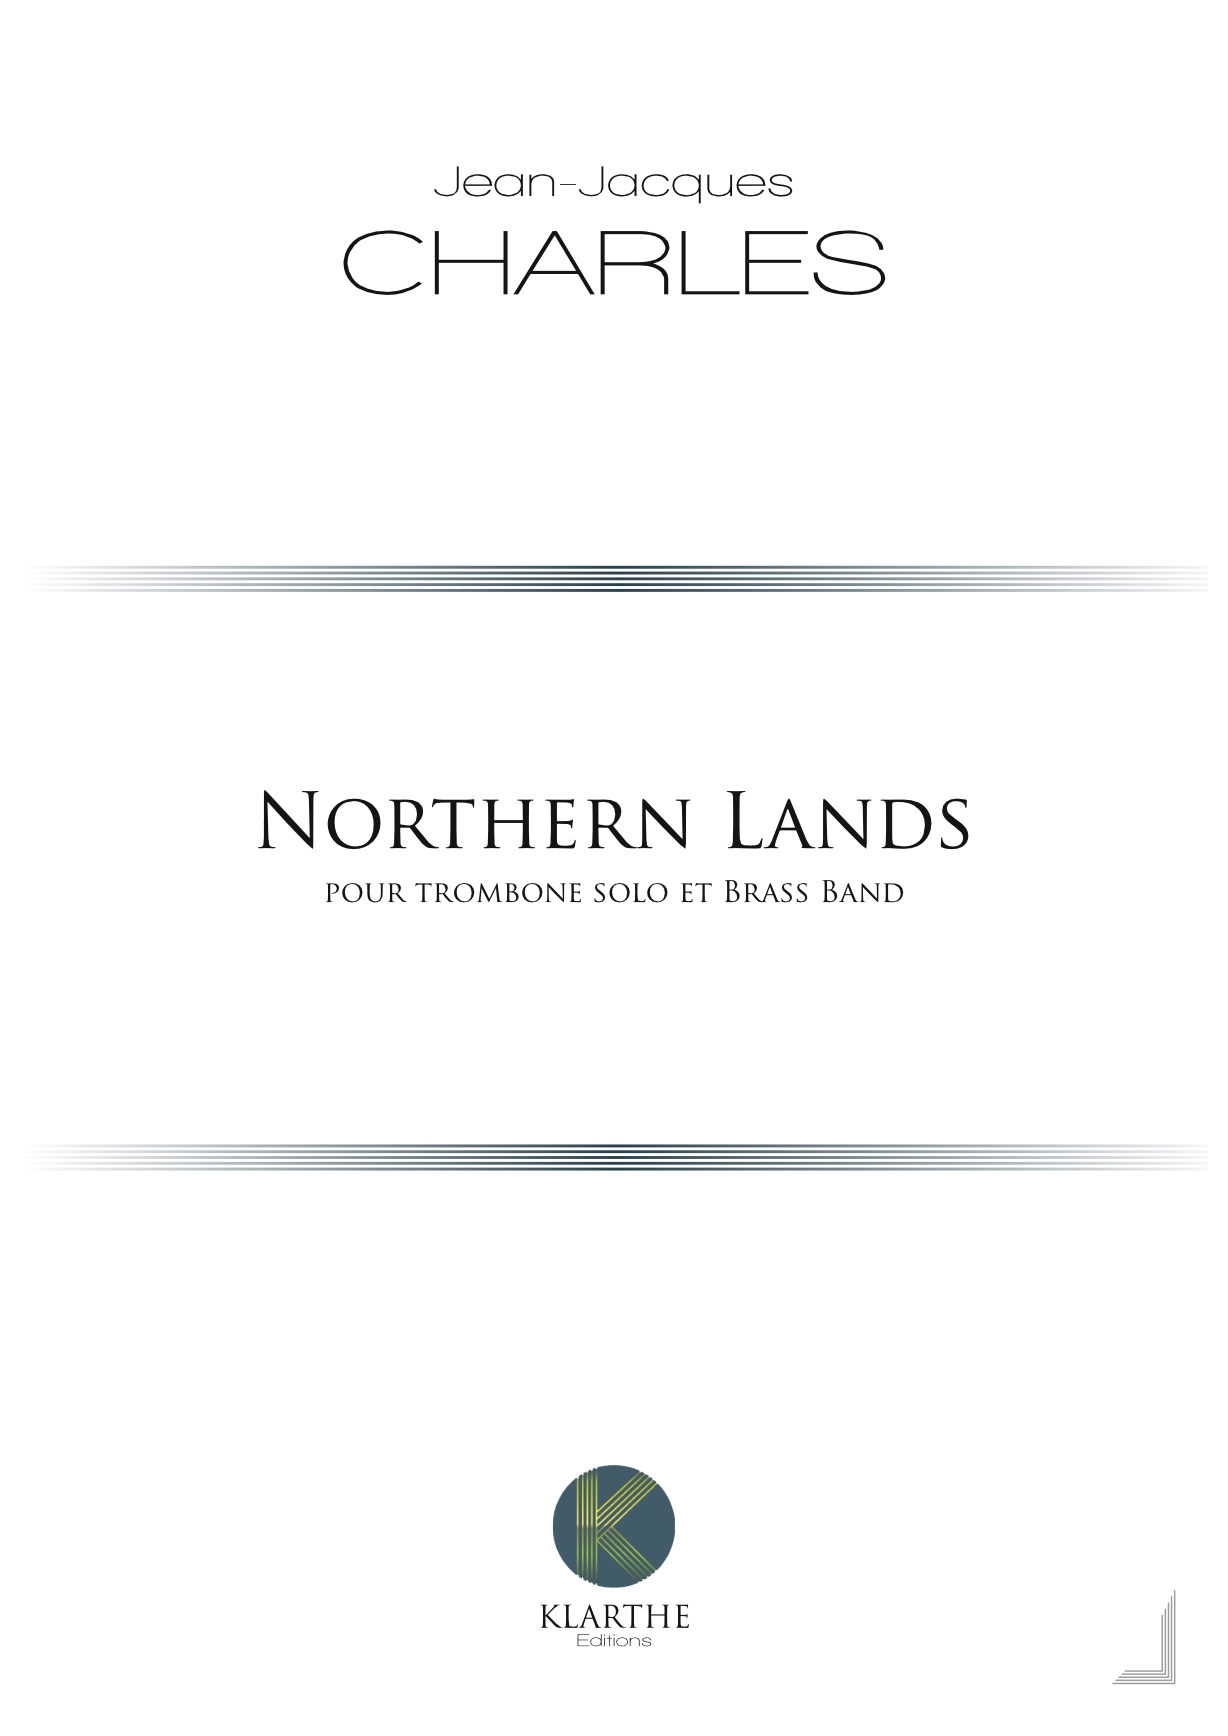 Northern Lands (CHARLES JEAN-JACQUES)